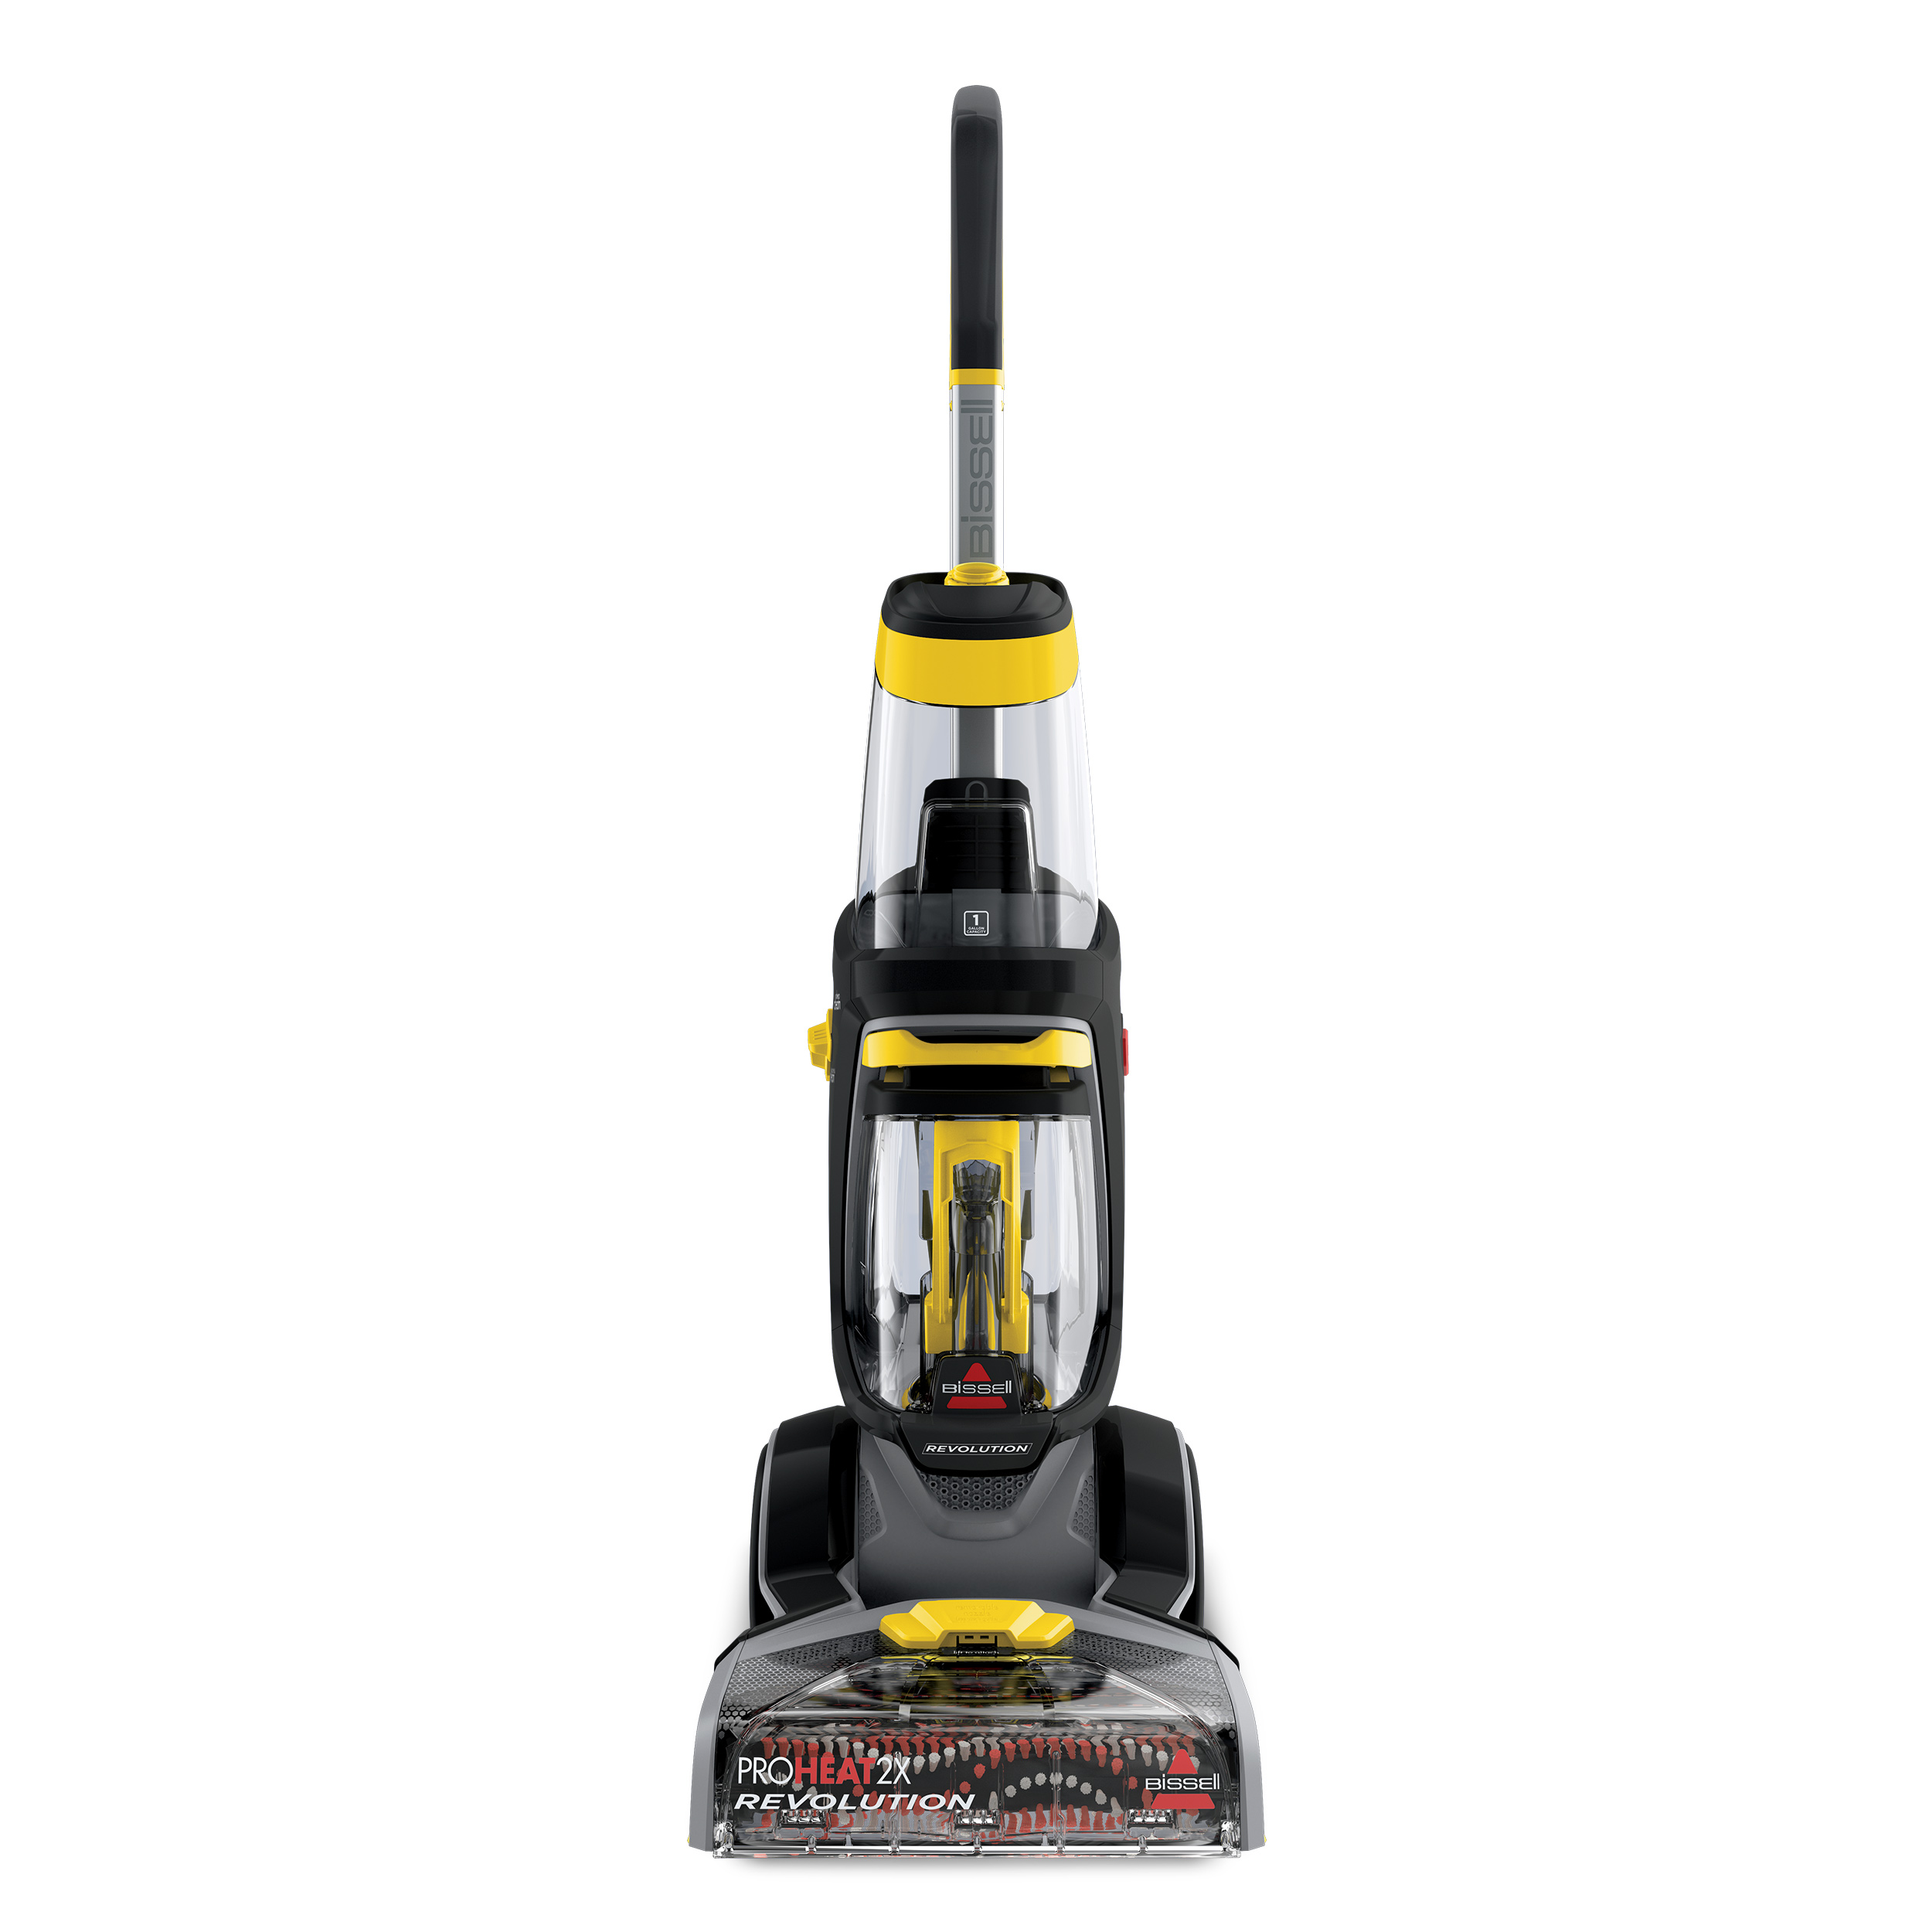 BISSELL Pro Heat 2X Revolution Advanced Carpet Cleaner 1551 - image 1 of 11